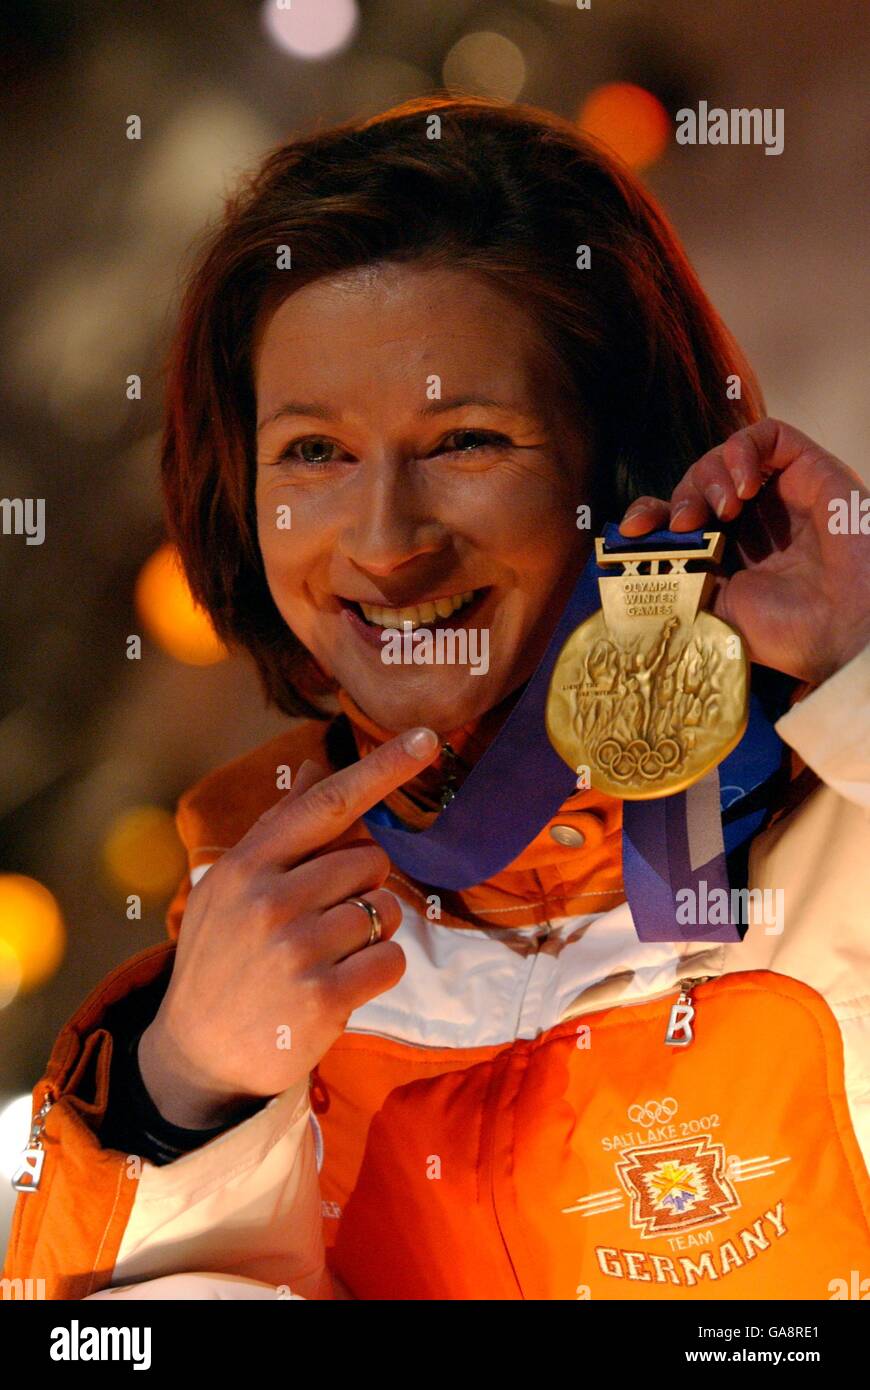 Germany's Claudia Pechstein celebrates with her gold medal Stock Photo